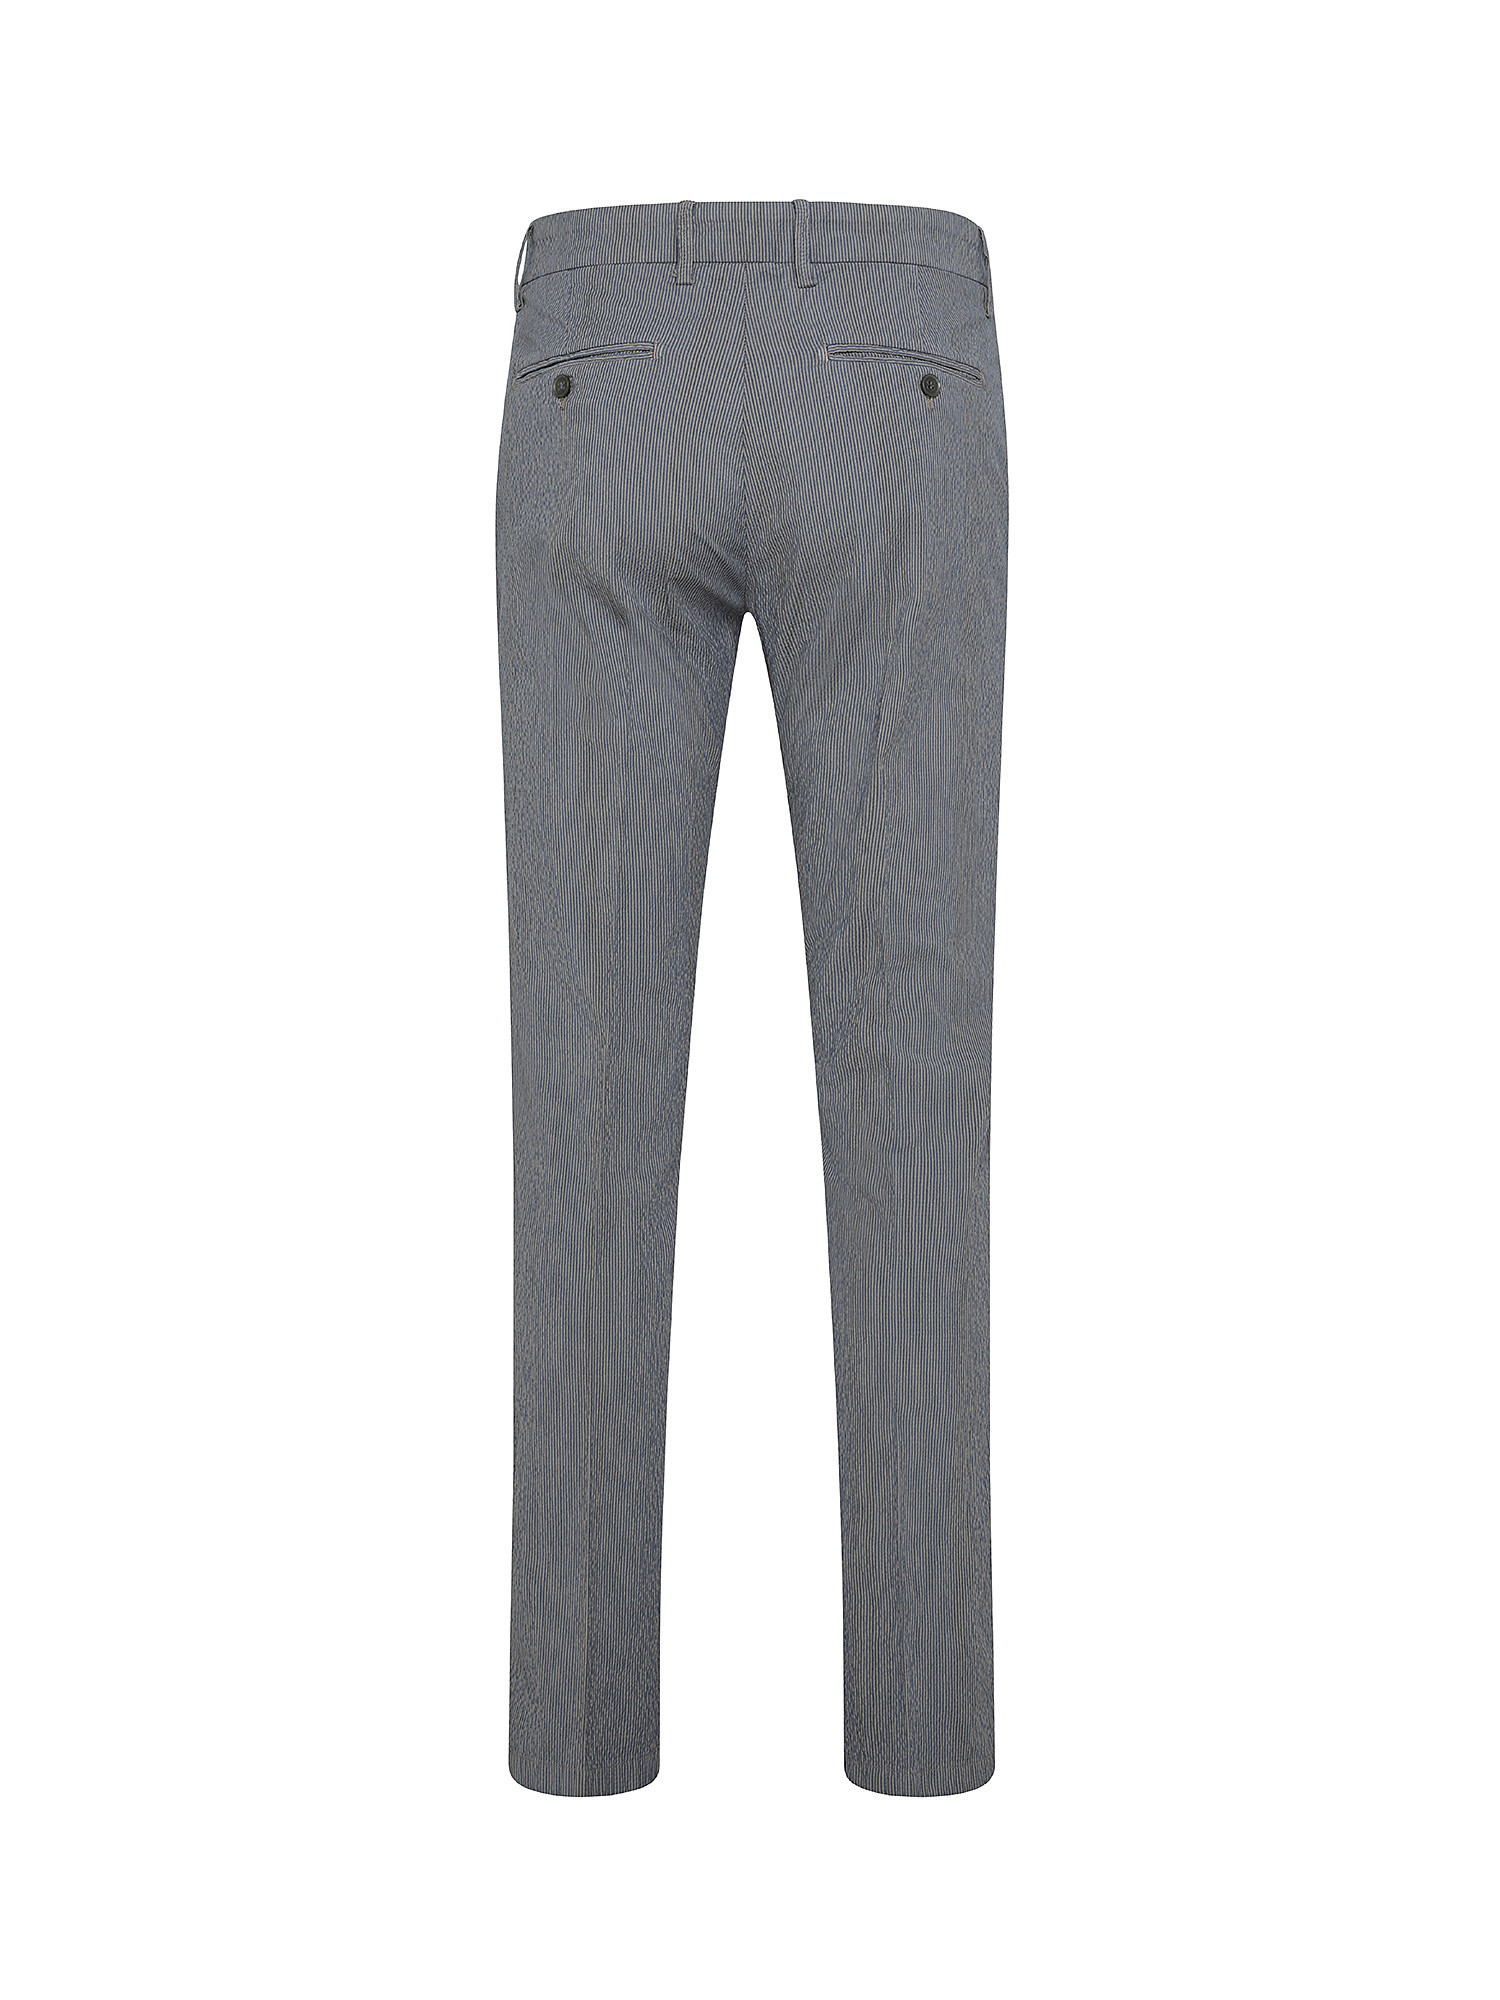 Chino trousers, Grey, large image number 1